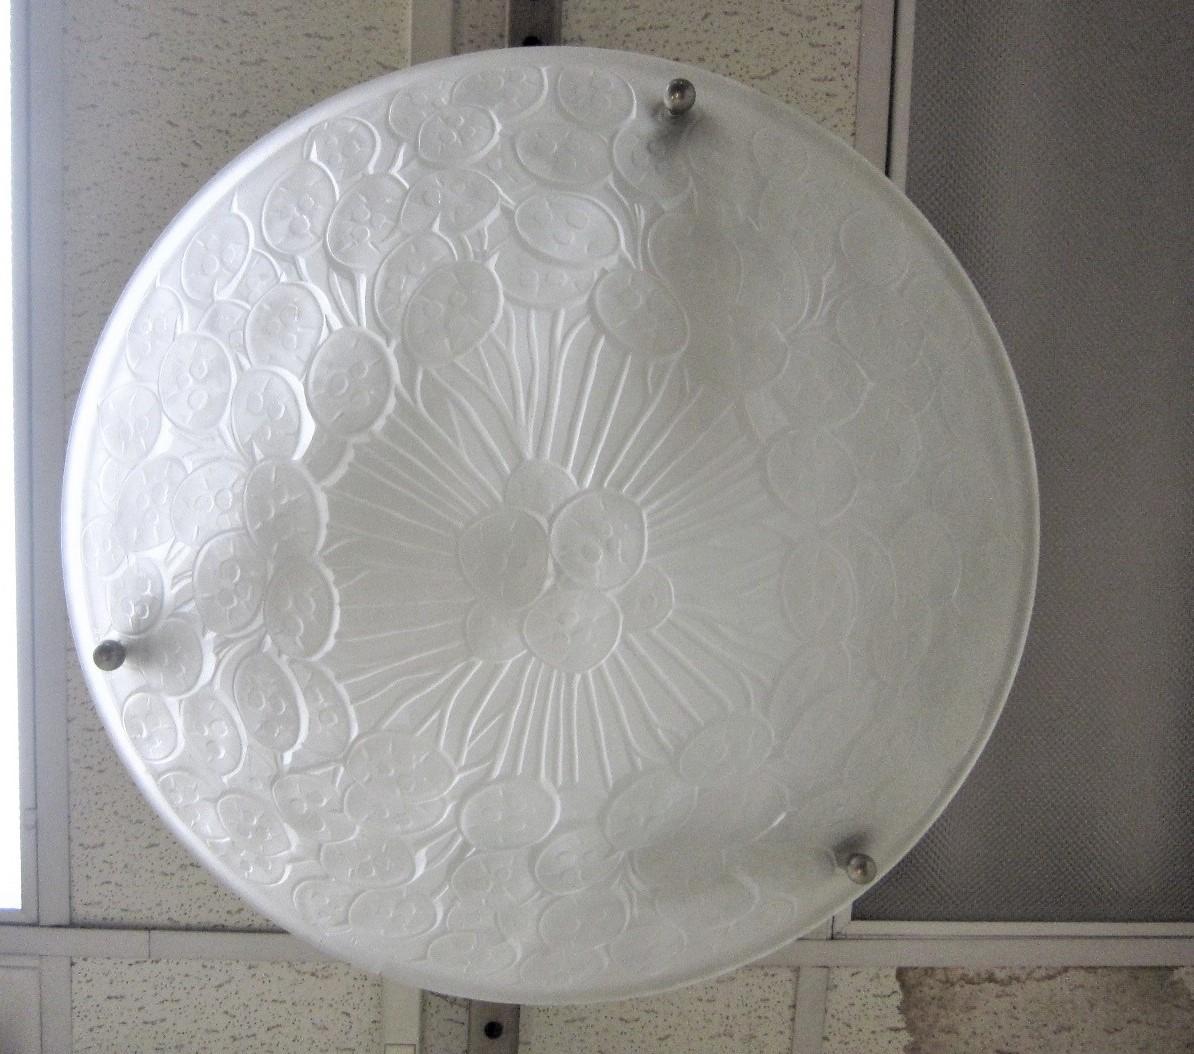 French frosted art glass original Art Deco bowl shaped pendant fixture produced by the renown Parisian firm of Etling. A frosted white molded glass shade featuring an honesty / monnaie du pape pattern is suspended by a nickeled bronze armature,